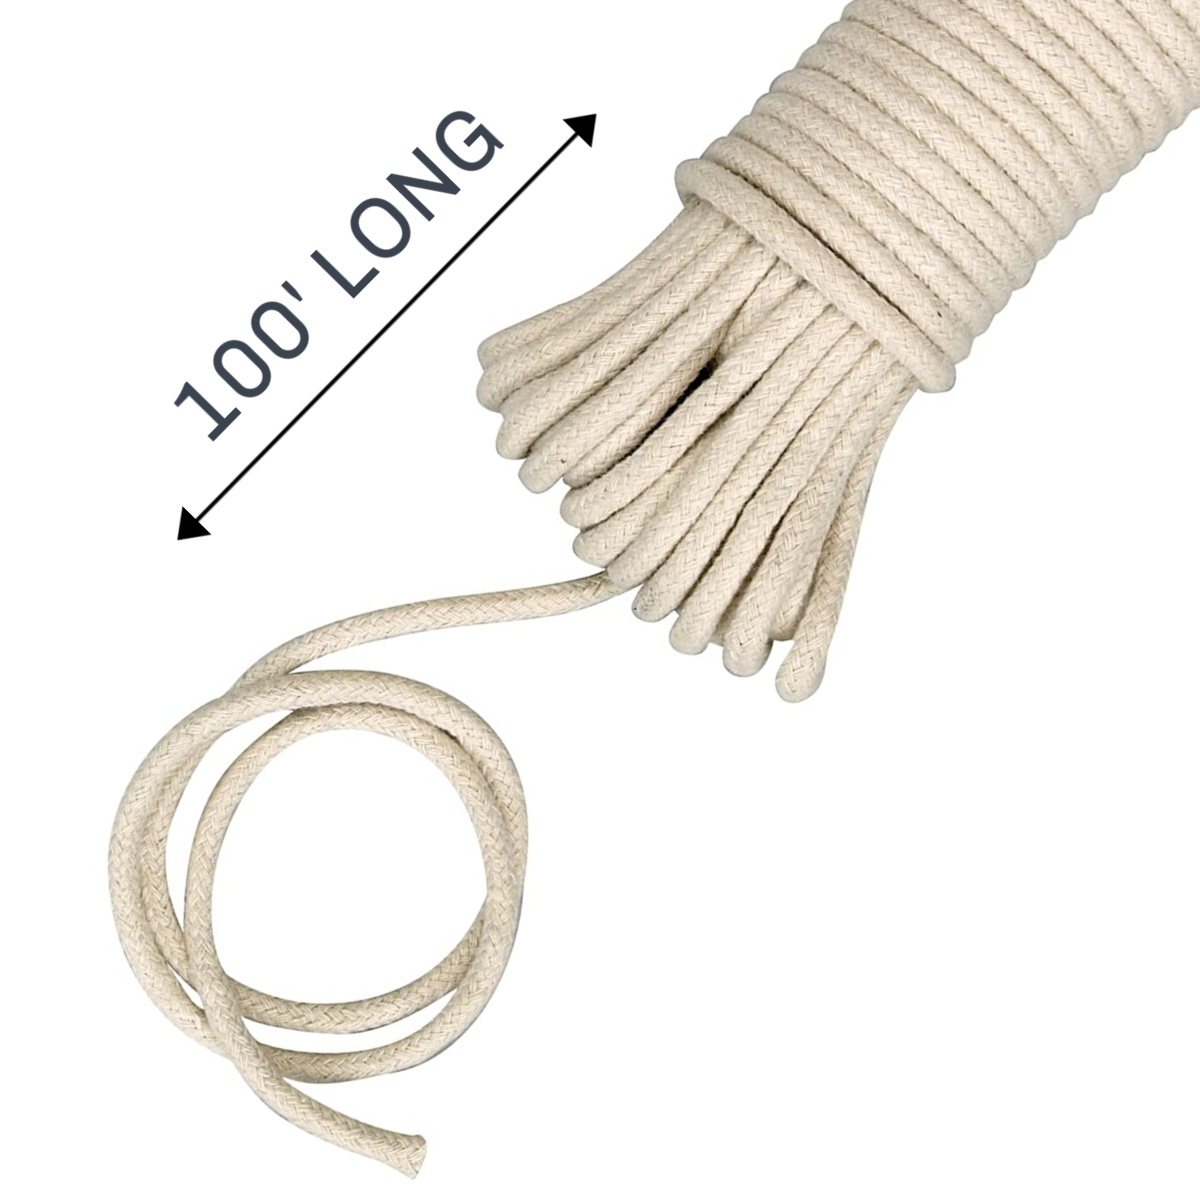 7/32 Inch Scottie Cotton Line Clothesline - 100% All-Natural Cotton Cover -  All Purpose Laundry Line and Dryer Rope - For Outdoor / Indoor Clothes  Drying, Crafting, and Art Projects 